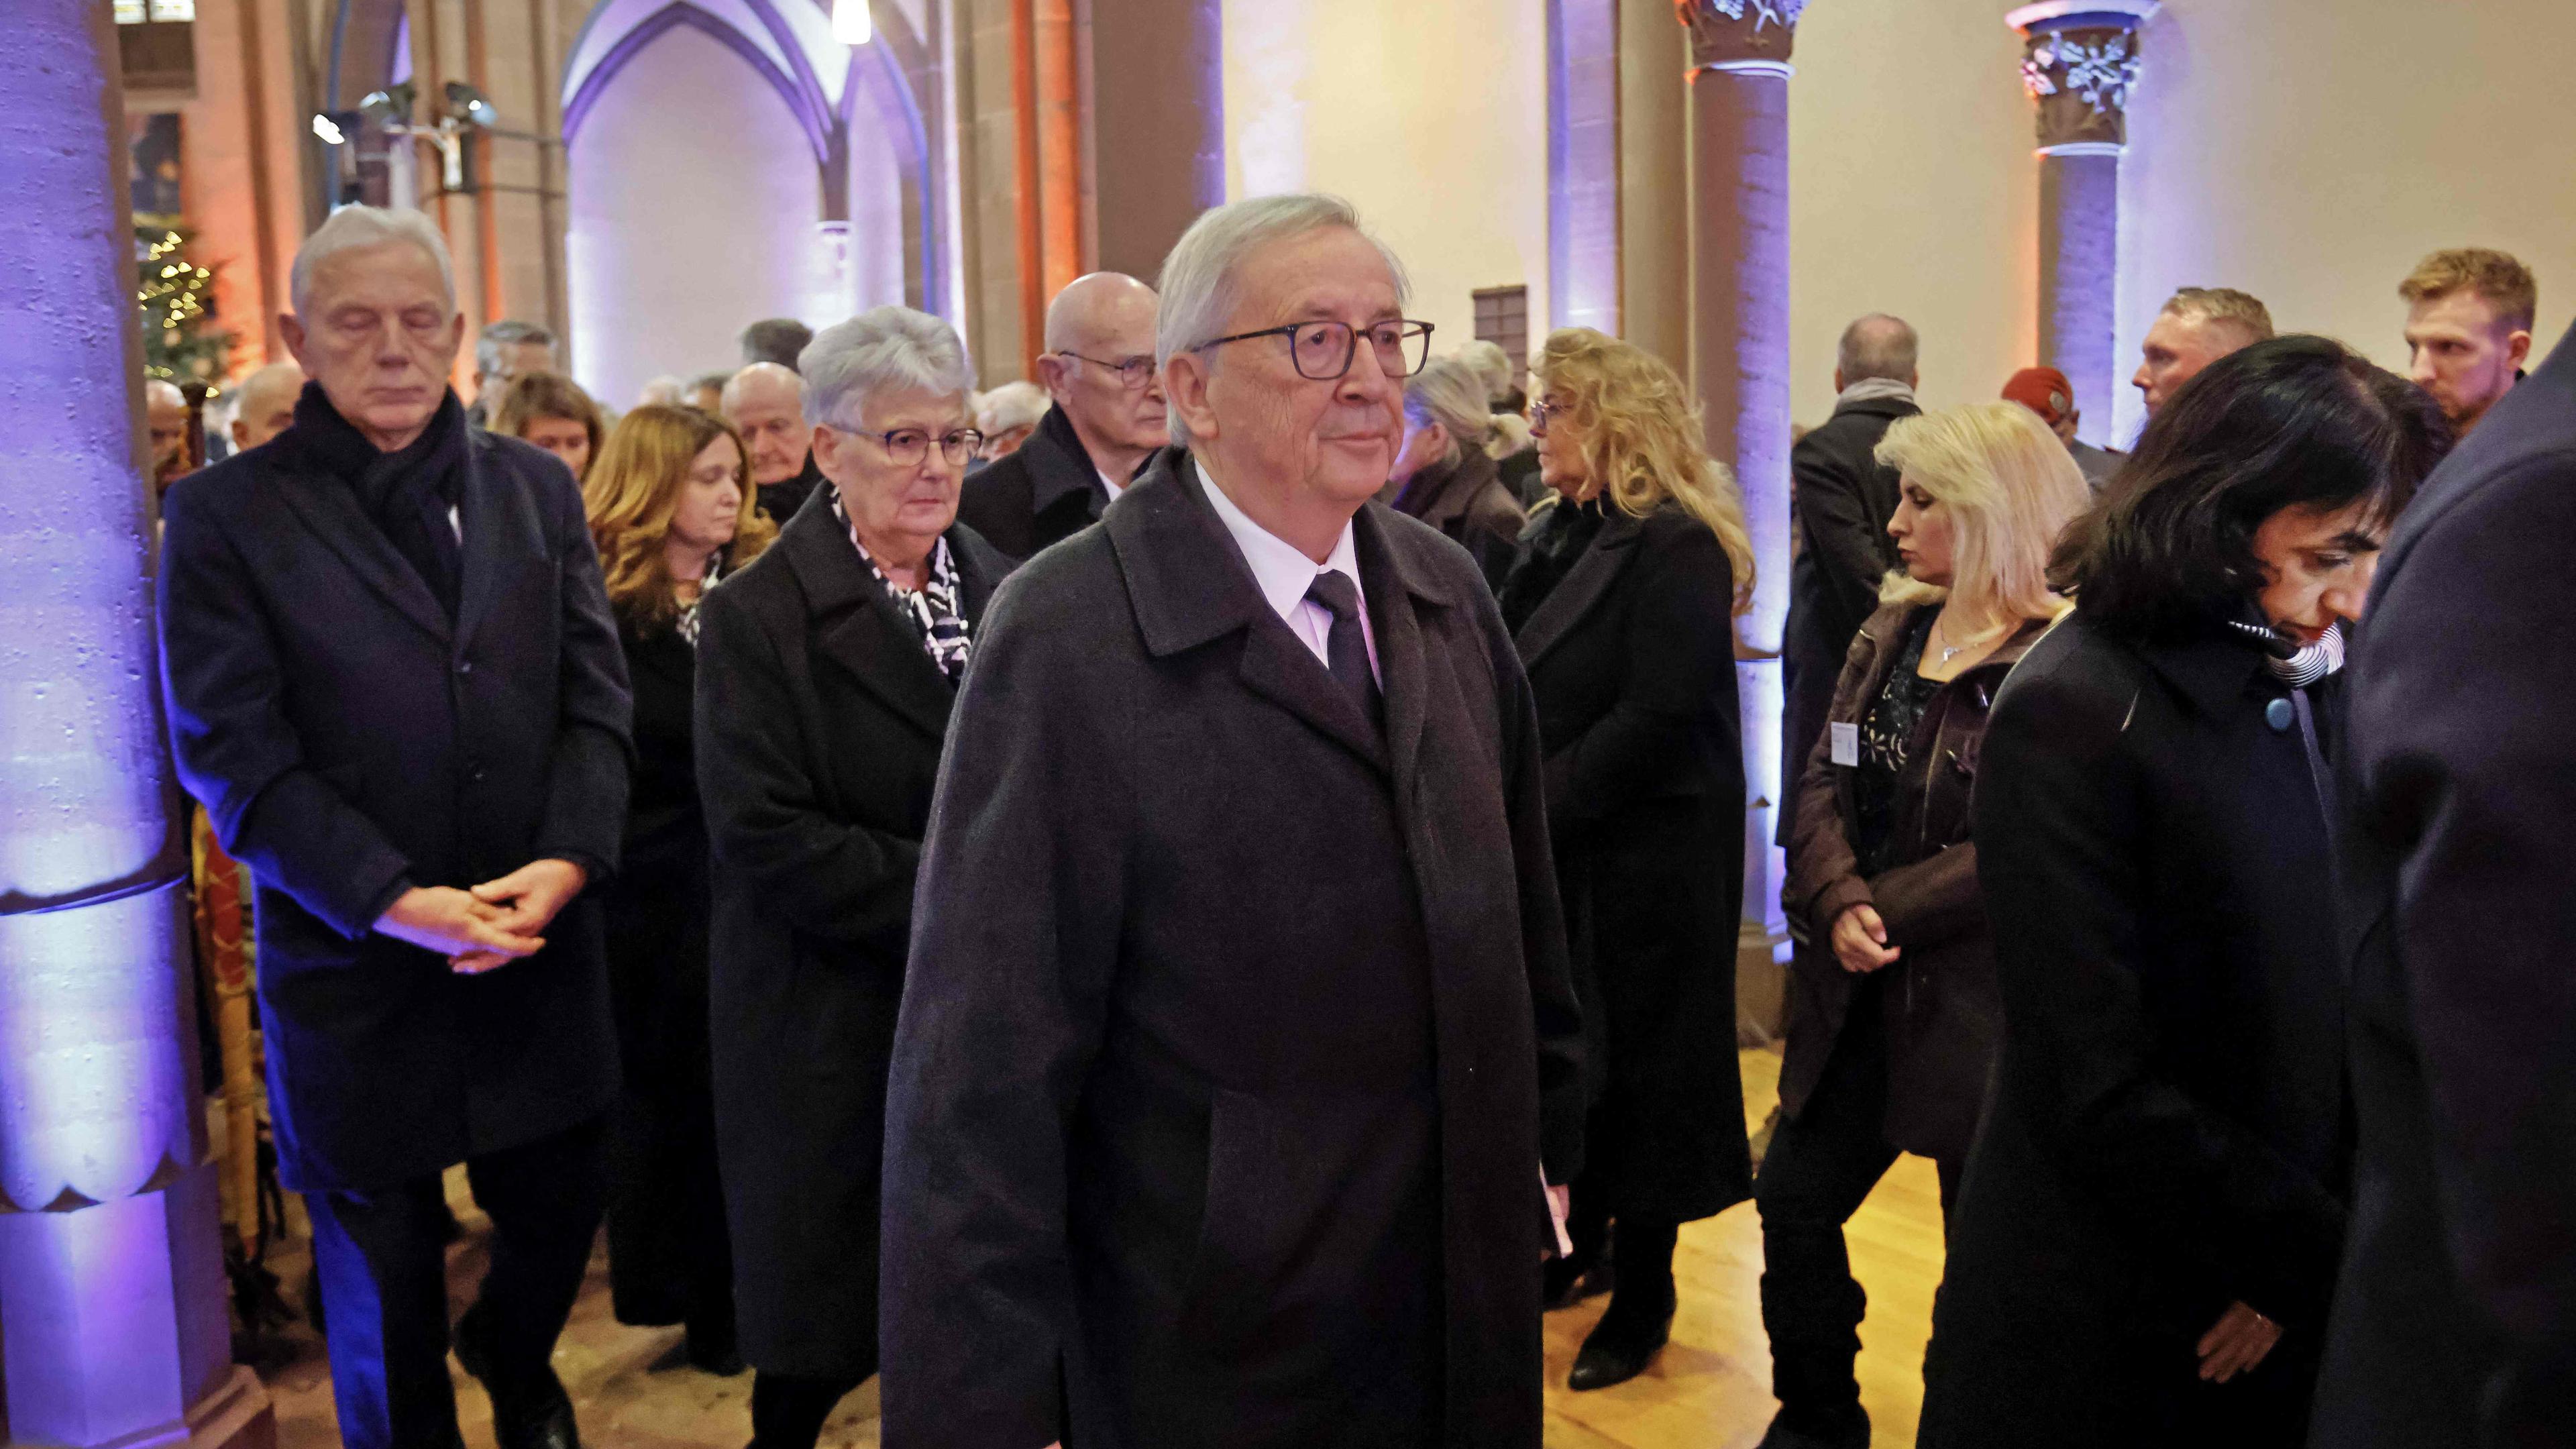 Former European Commission President Jean-Claude Juncker leaves the church after the funeral service of late German political heavyweight Wolfgang Schaeuble on January 5, 2024 at the Evangelische Stadtkirche Church in Offenburg, southern Germany. Wolfgang Schaeuble, one of the most important figures in German politics for decades and an icon of budgetary rigour in the eurozone, had died aged 81, on December 26, 2023. (Photo by Philipp von Ditfurth / POOL / AFP)